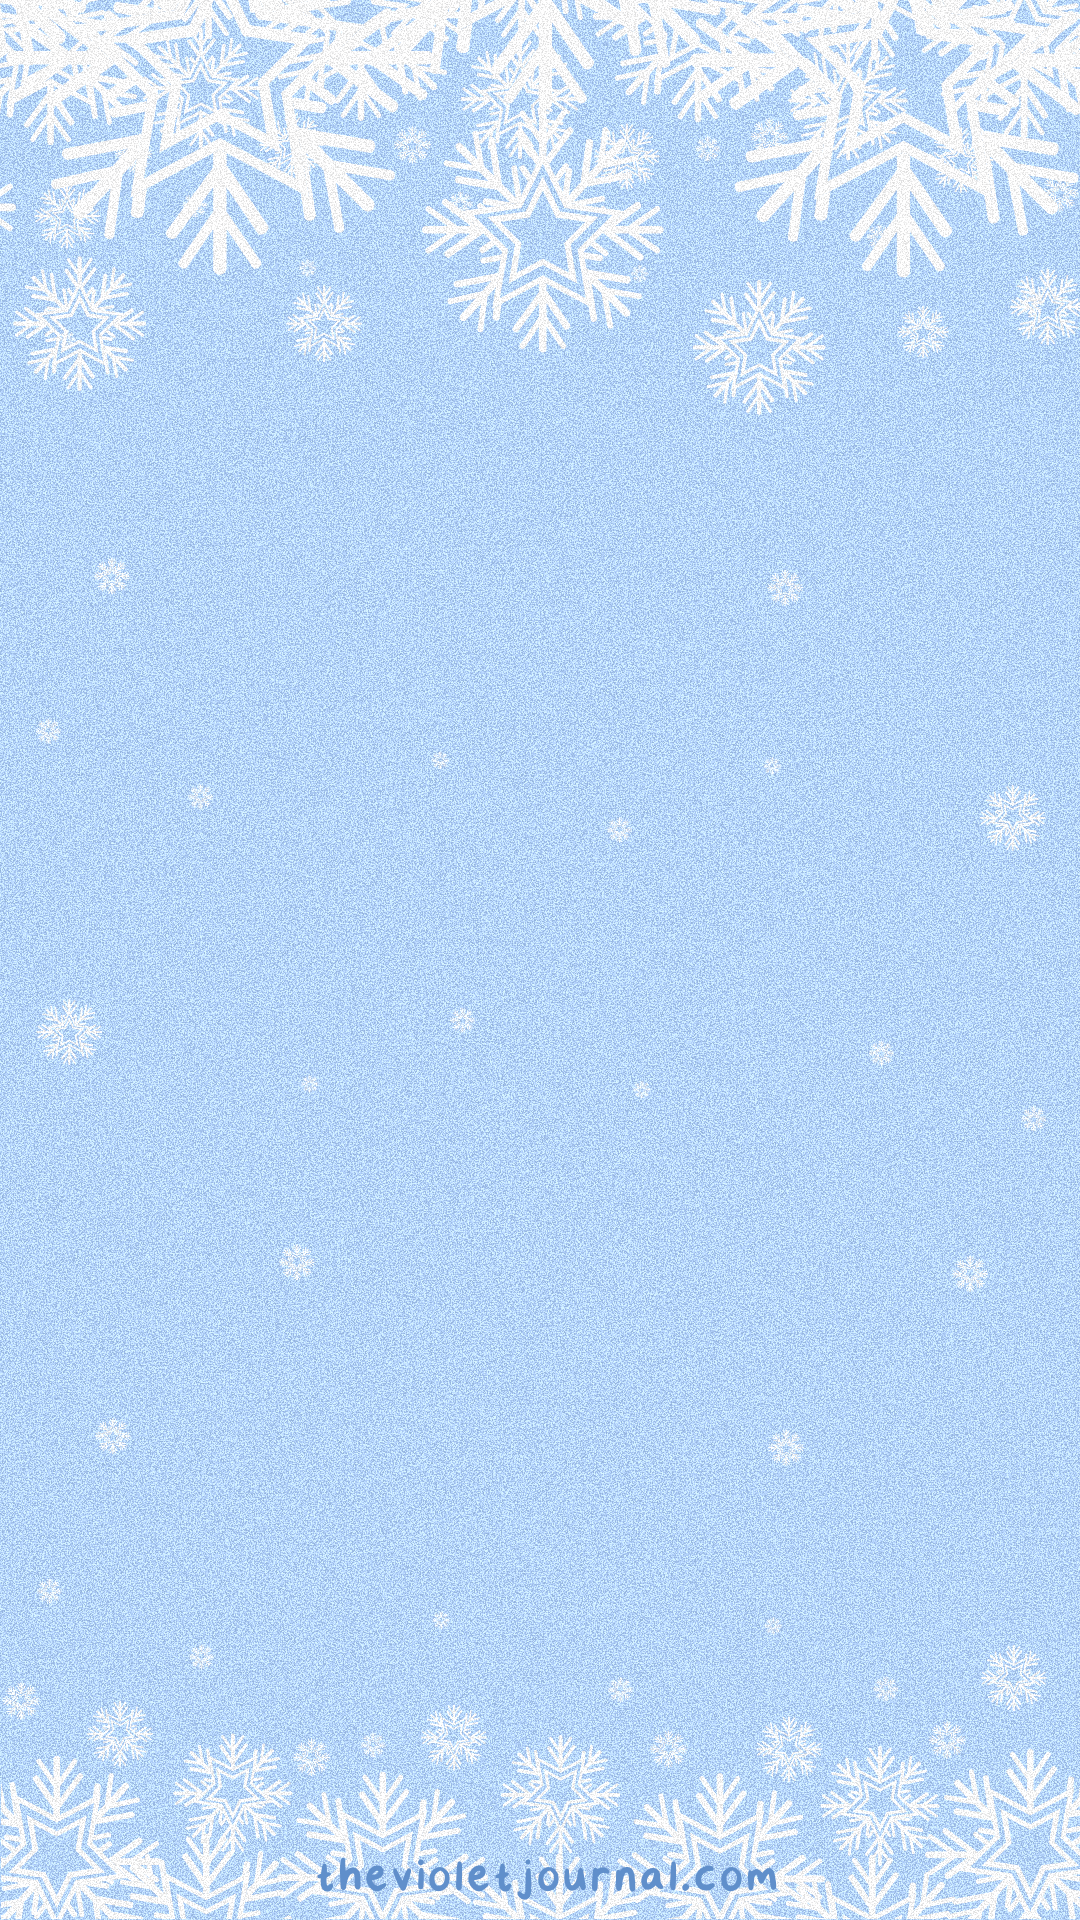 Blue Christmas iPhone Wallpaper with White Snowflakes. Winter wallpaper, iPhone wallpaper winter, Christmas wallpaper background